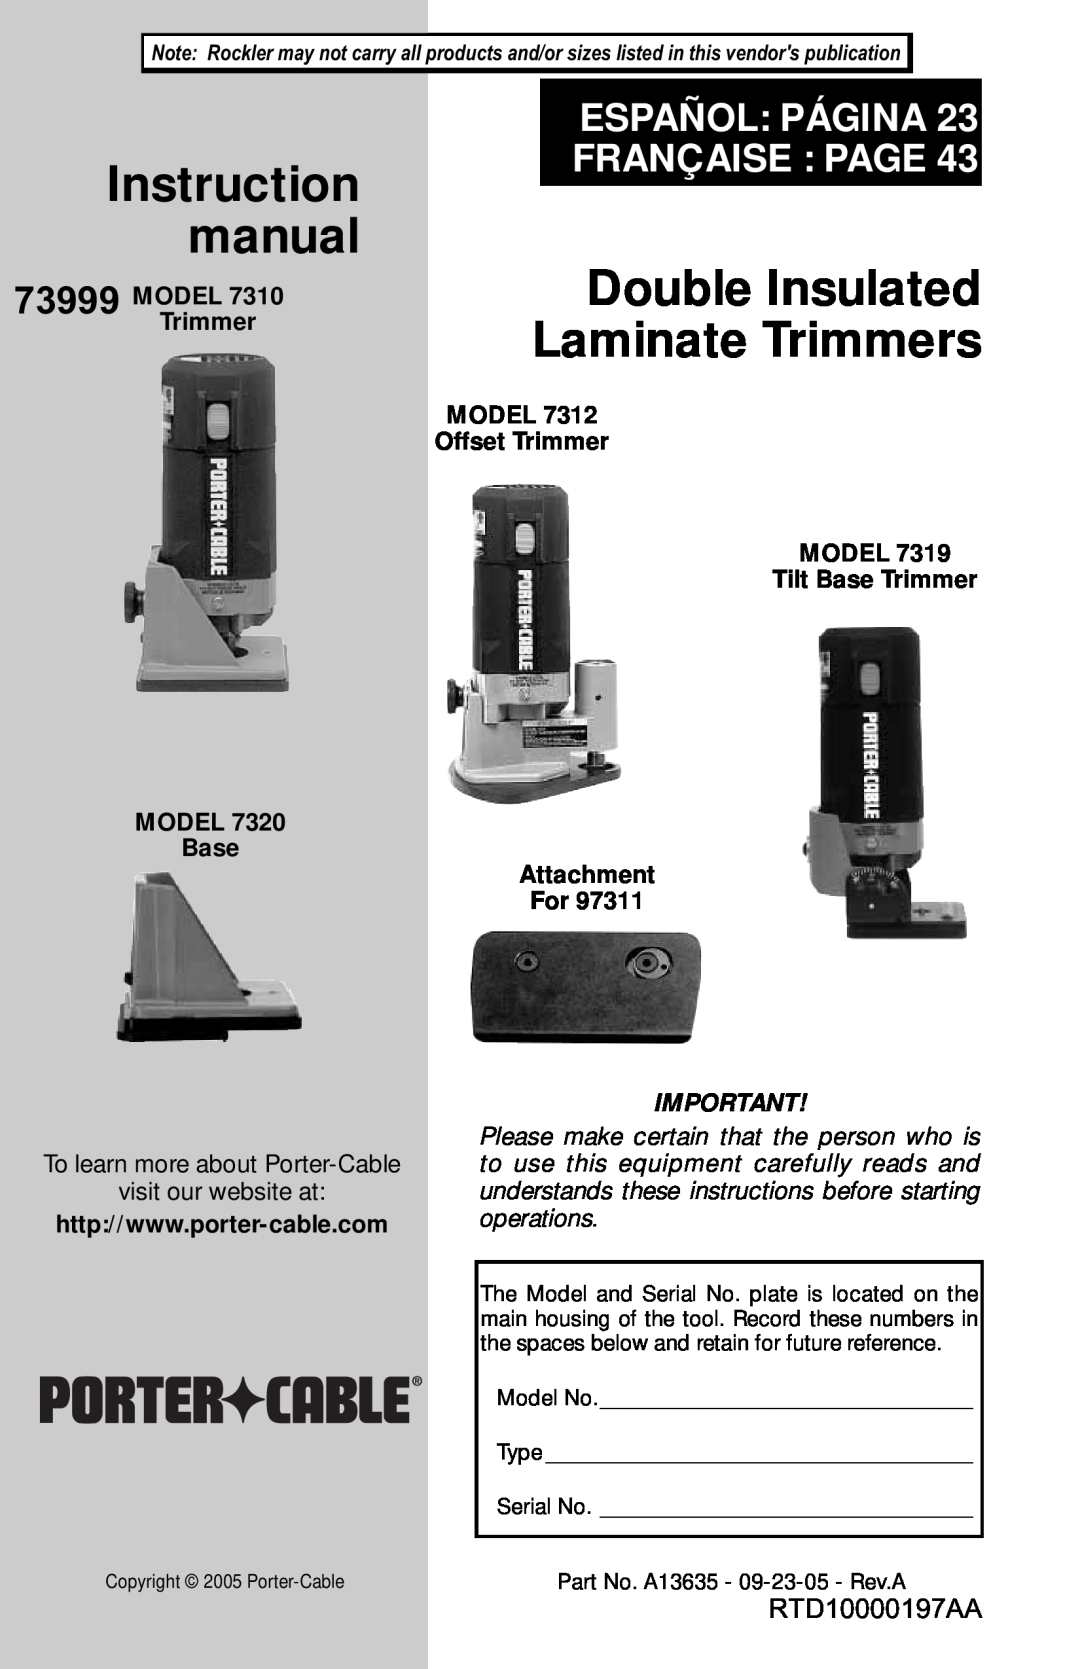 Porter-Cable 7310 instruction manual Double Insulated, Laminate Trimmers, Instruction, Español Página, Française Page 